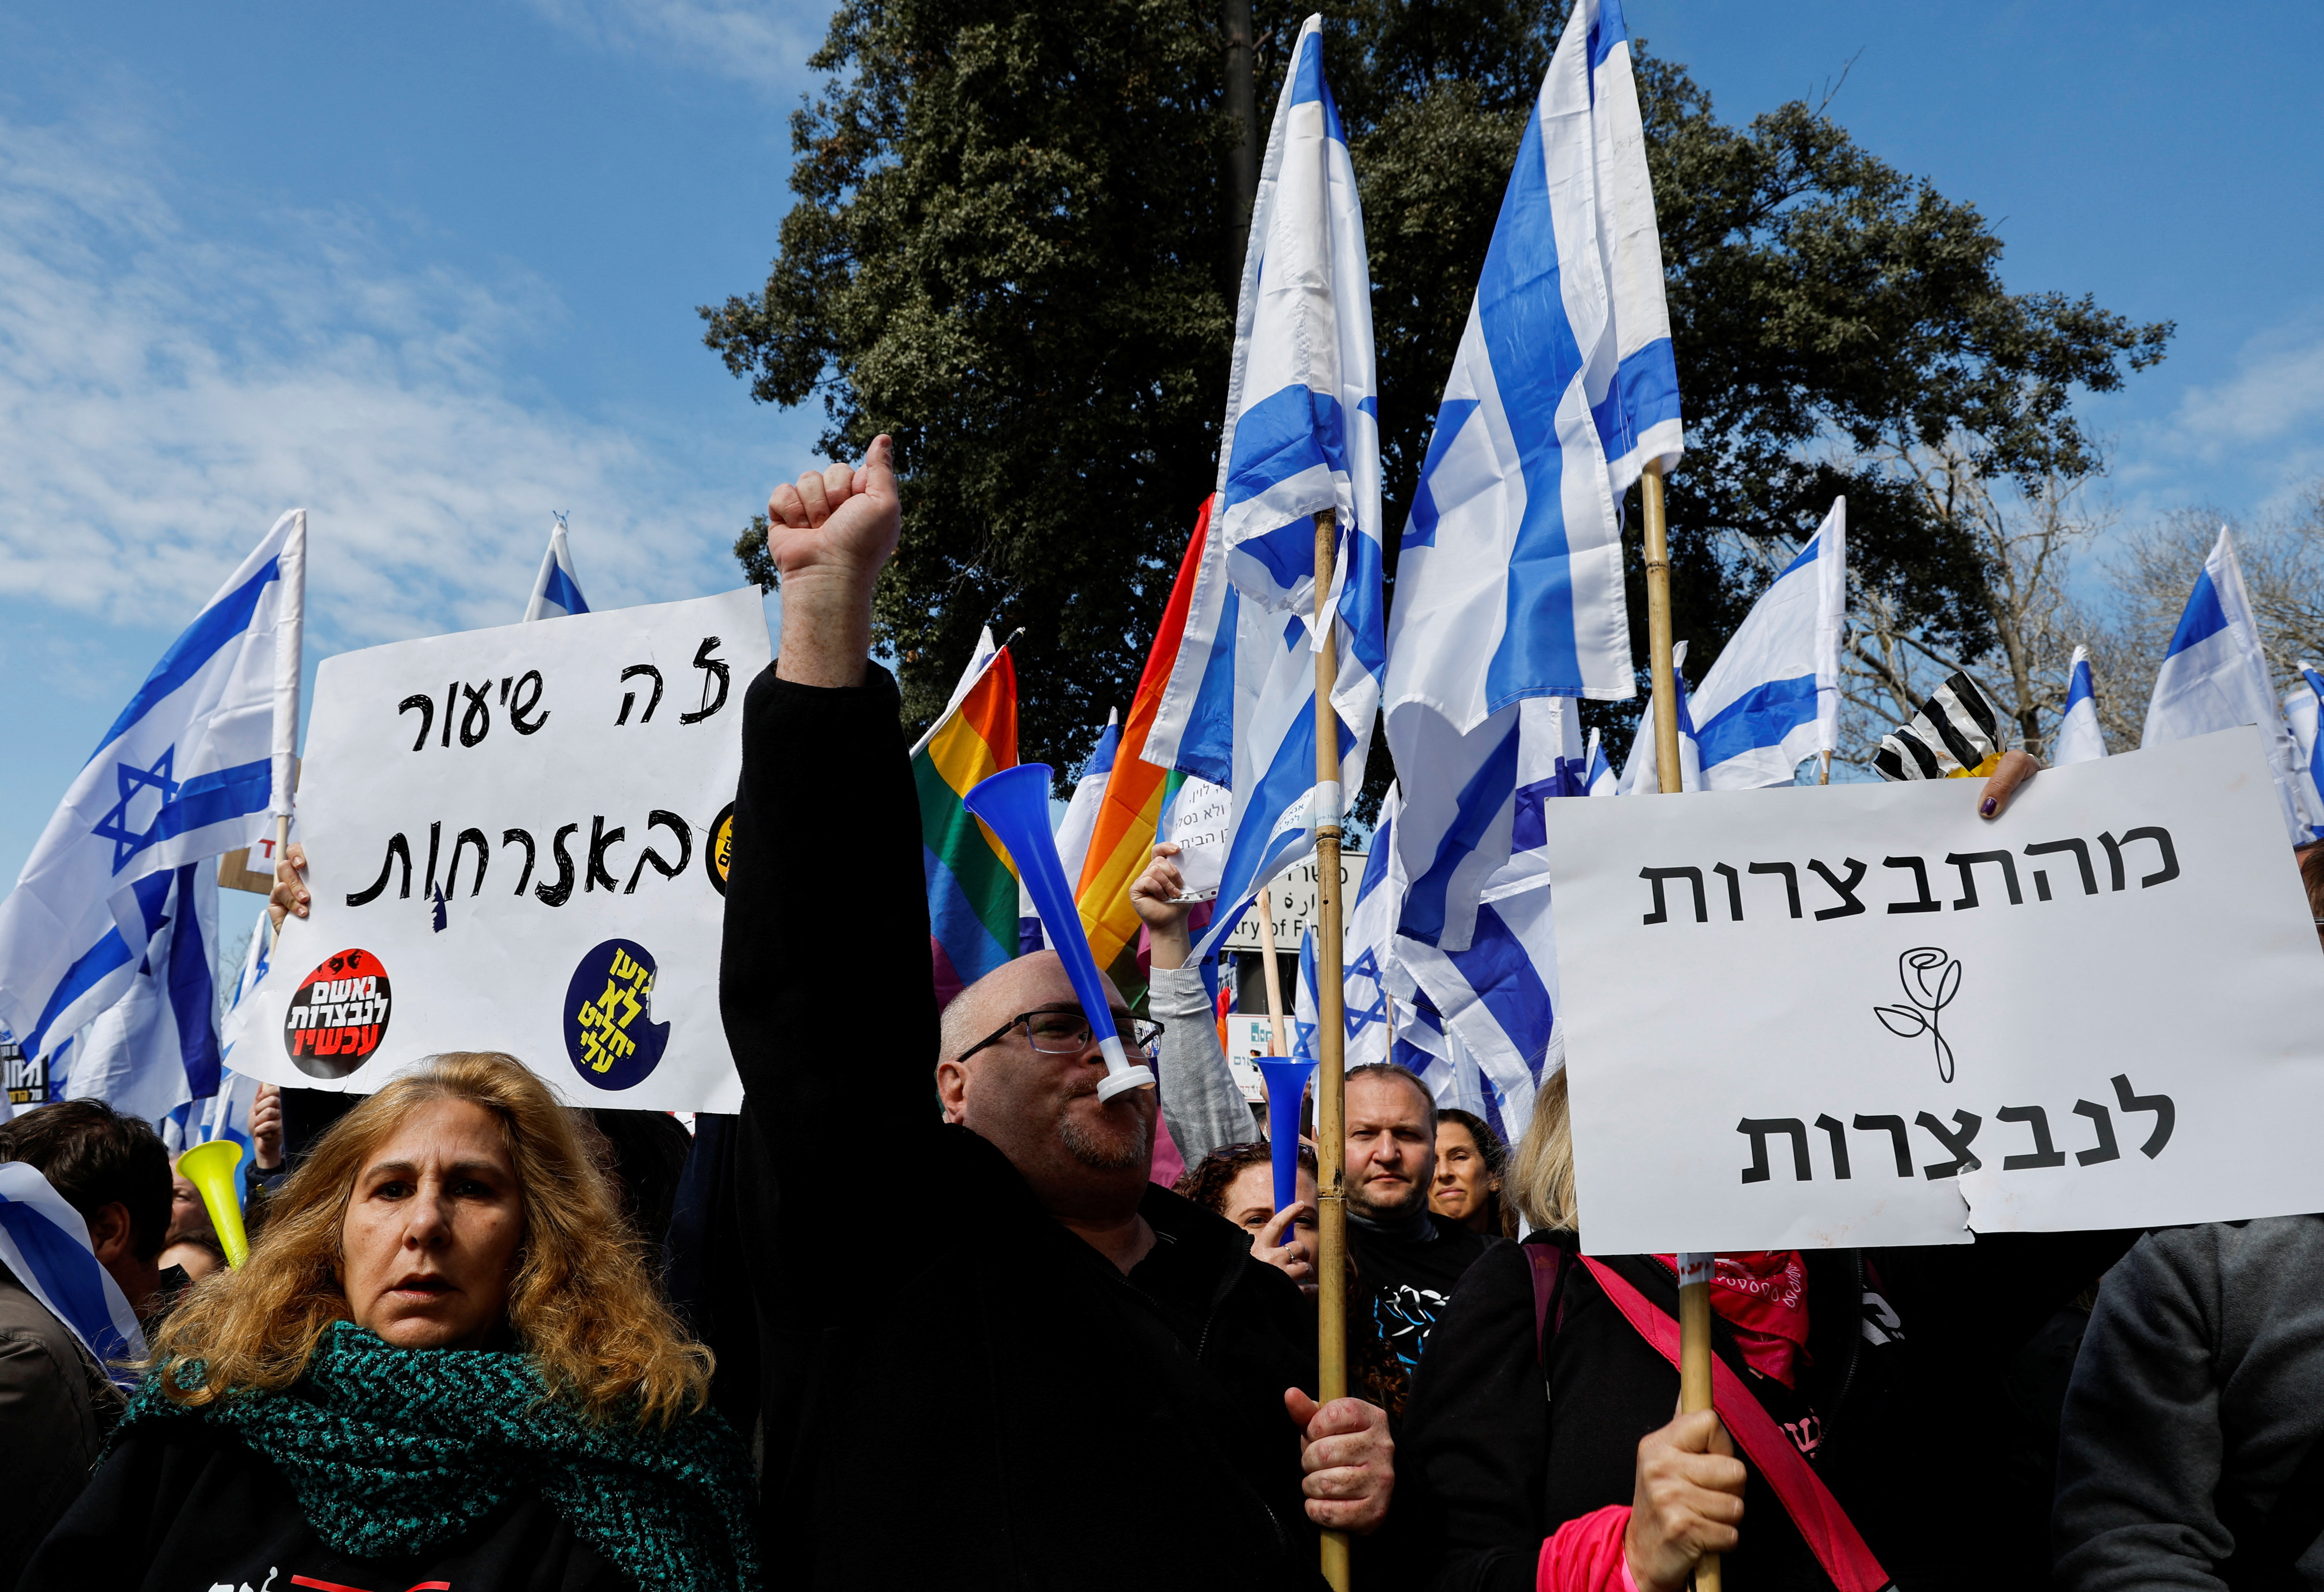 Israelis demonstrate on the day Israel's constitution committee is set to vote on judicial plan, in Jerusalem